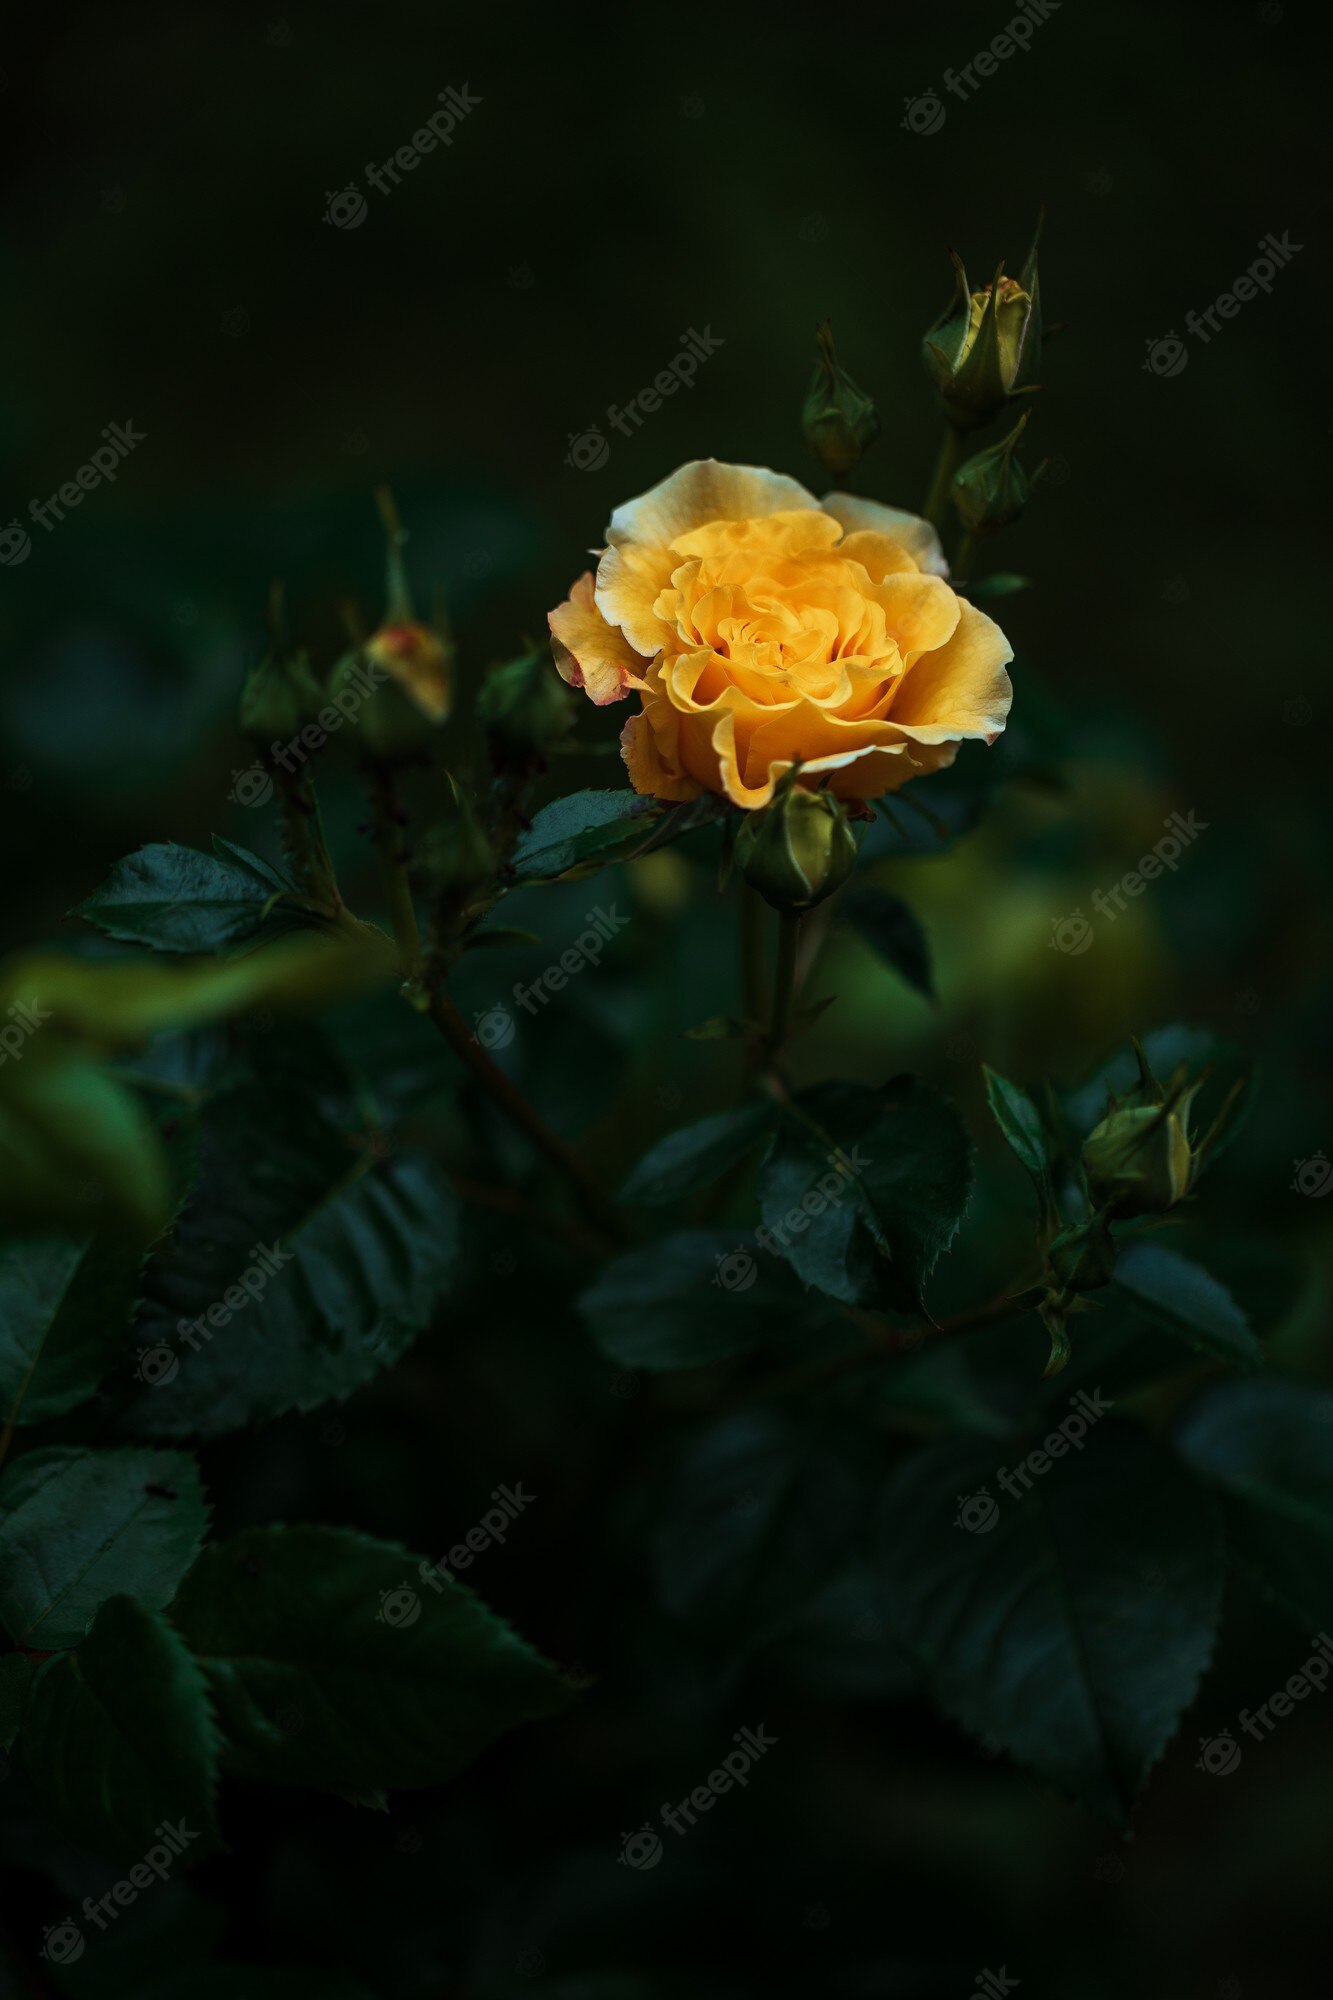 Yellow Rose Aesthetic Wallpapers